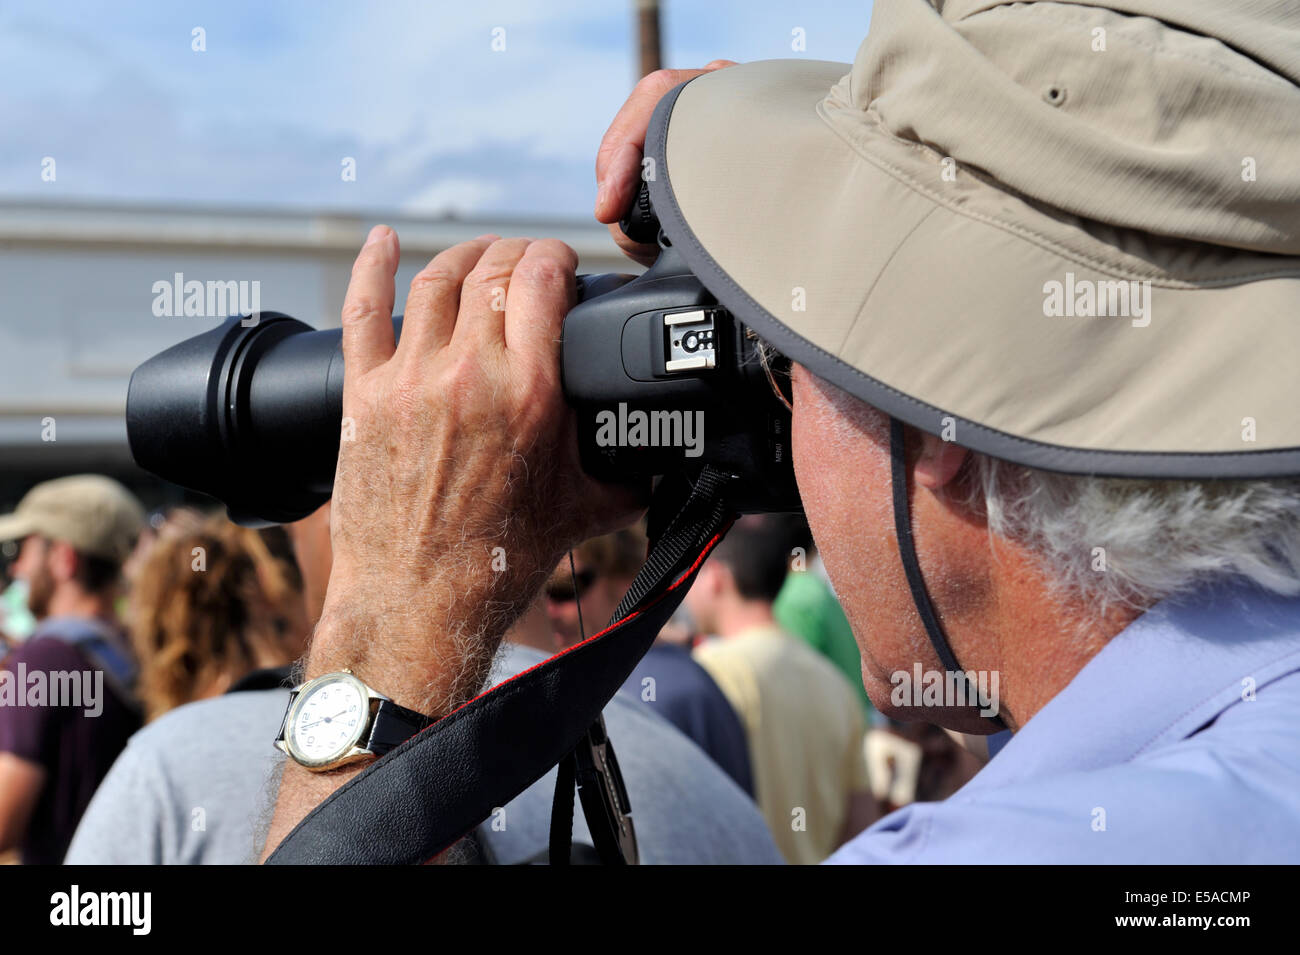 Man holding a camera taking a photograph at a festival] Stock Photo